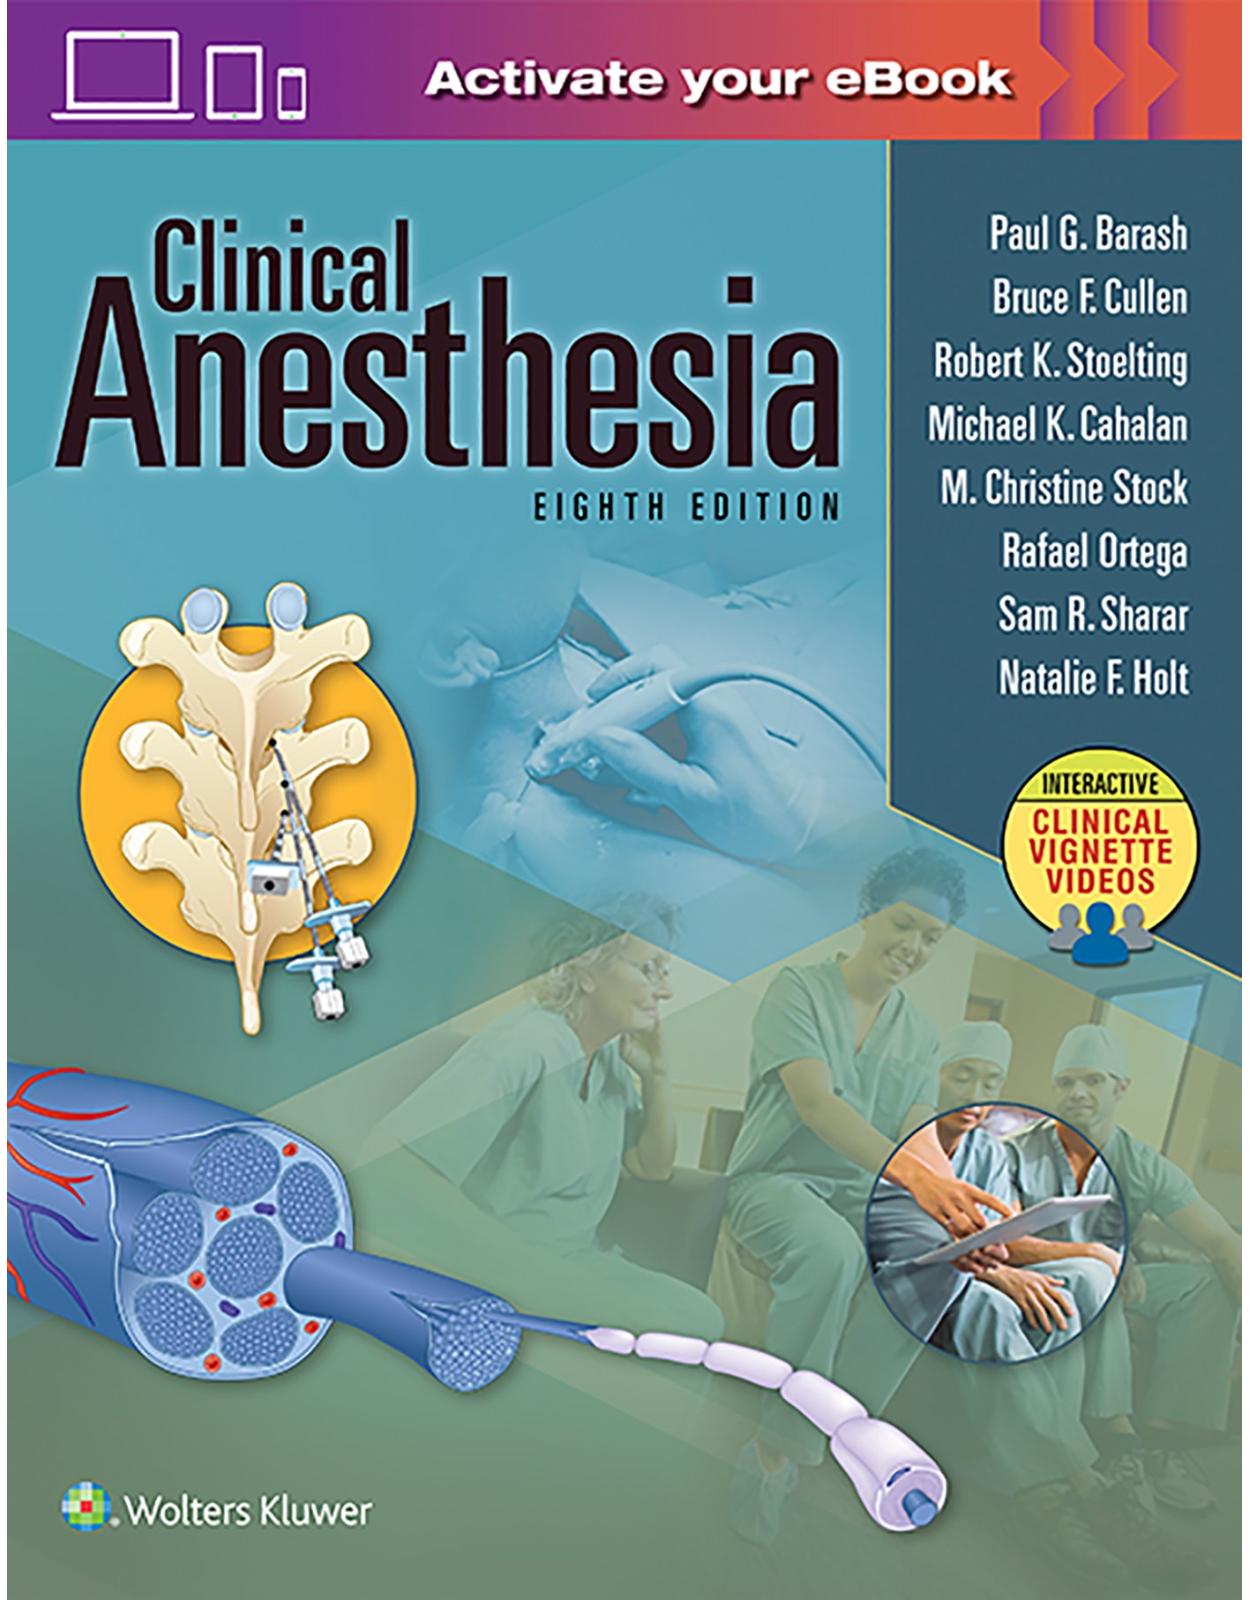 Clinical Anesthesia, 8e: Print + Ebook with Multimedia 